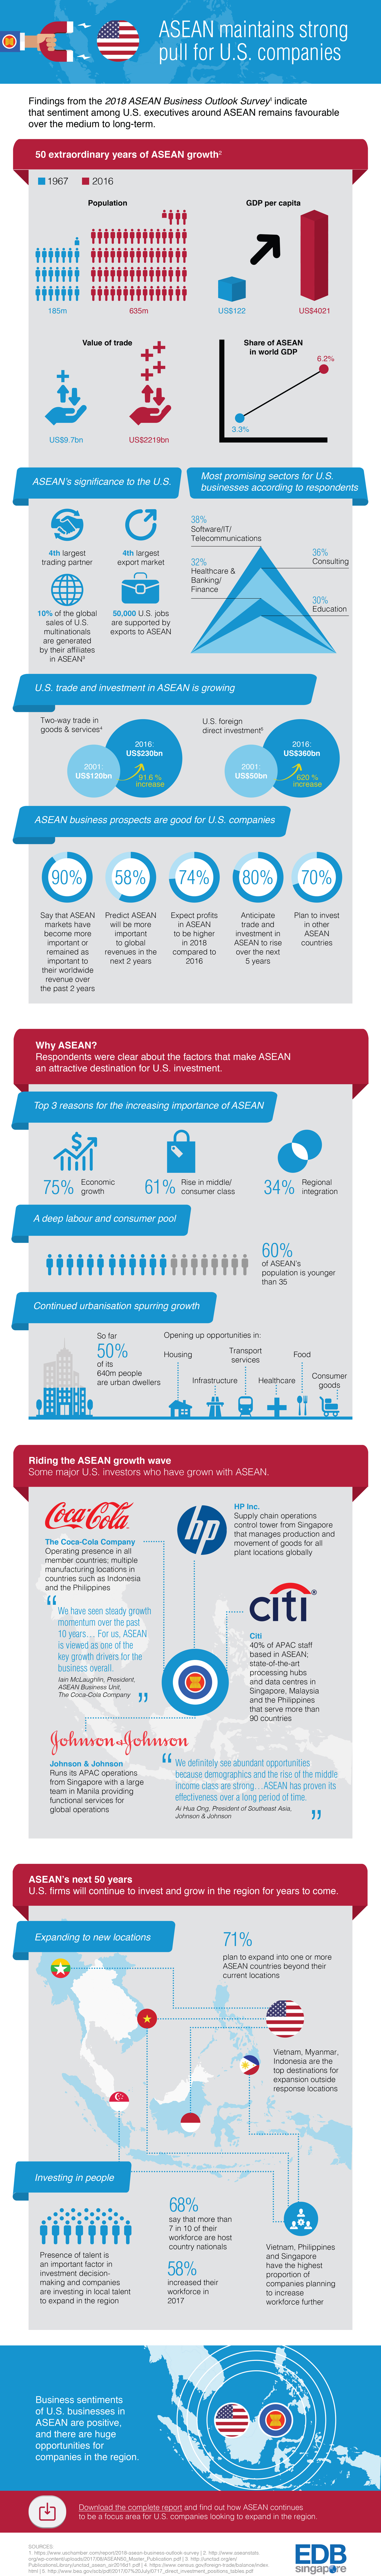 asean maintains strong pull for u.s companies infographics